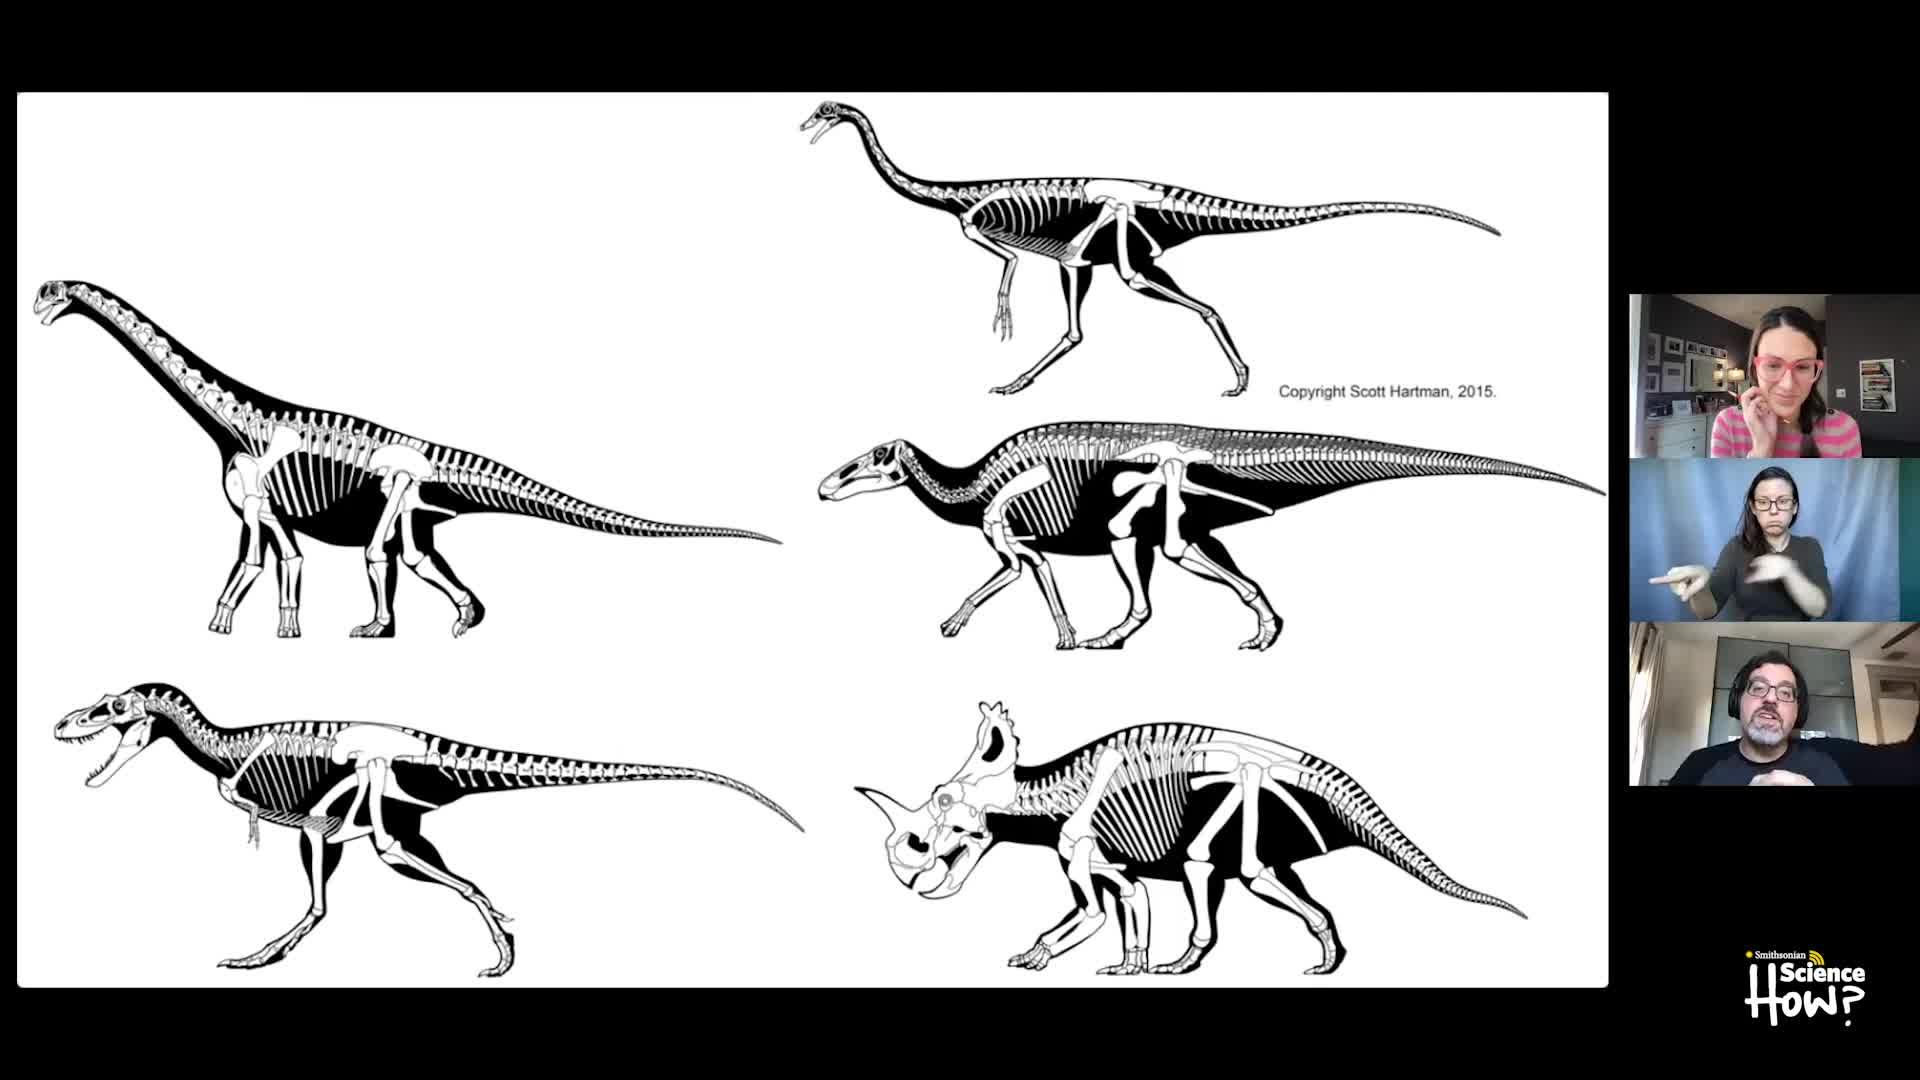 Take a T-Rex and a chicken and you'll see how dinosaurs shrank, survived  and evolved into birds